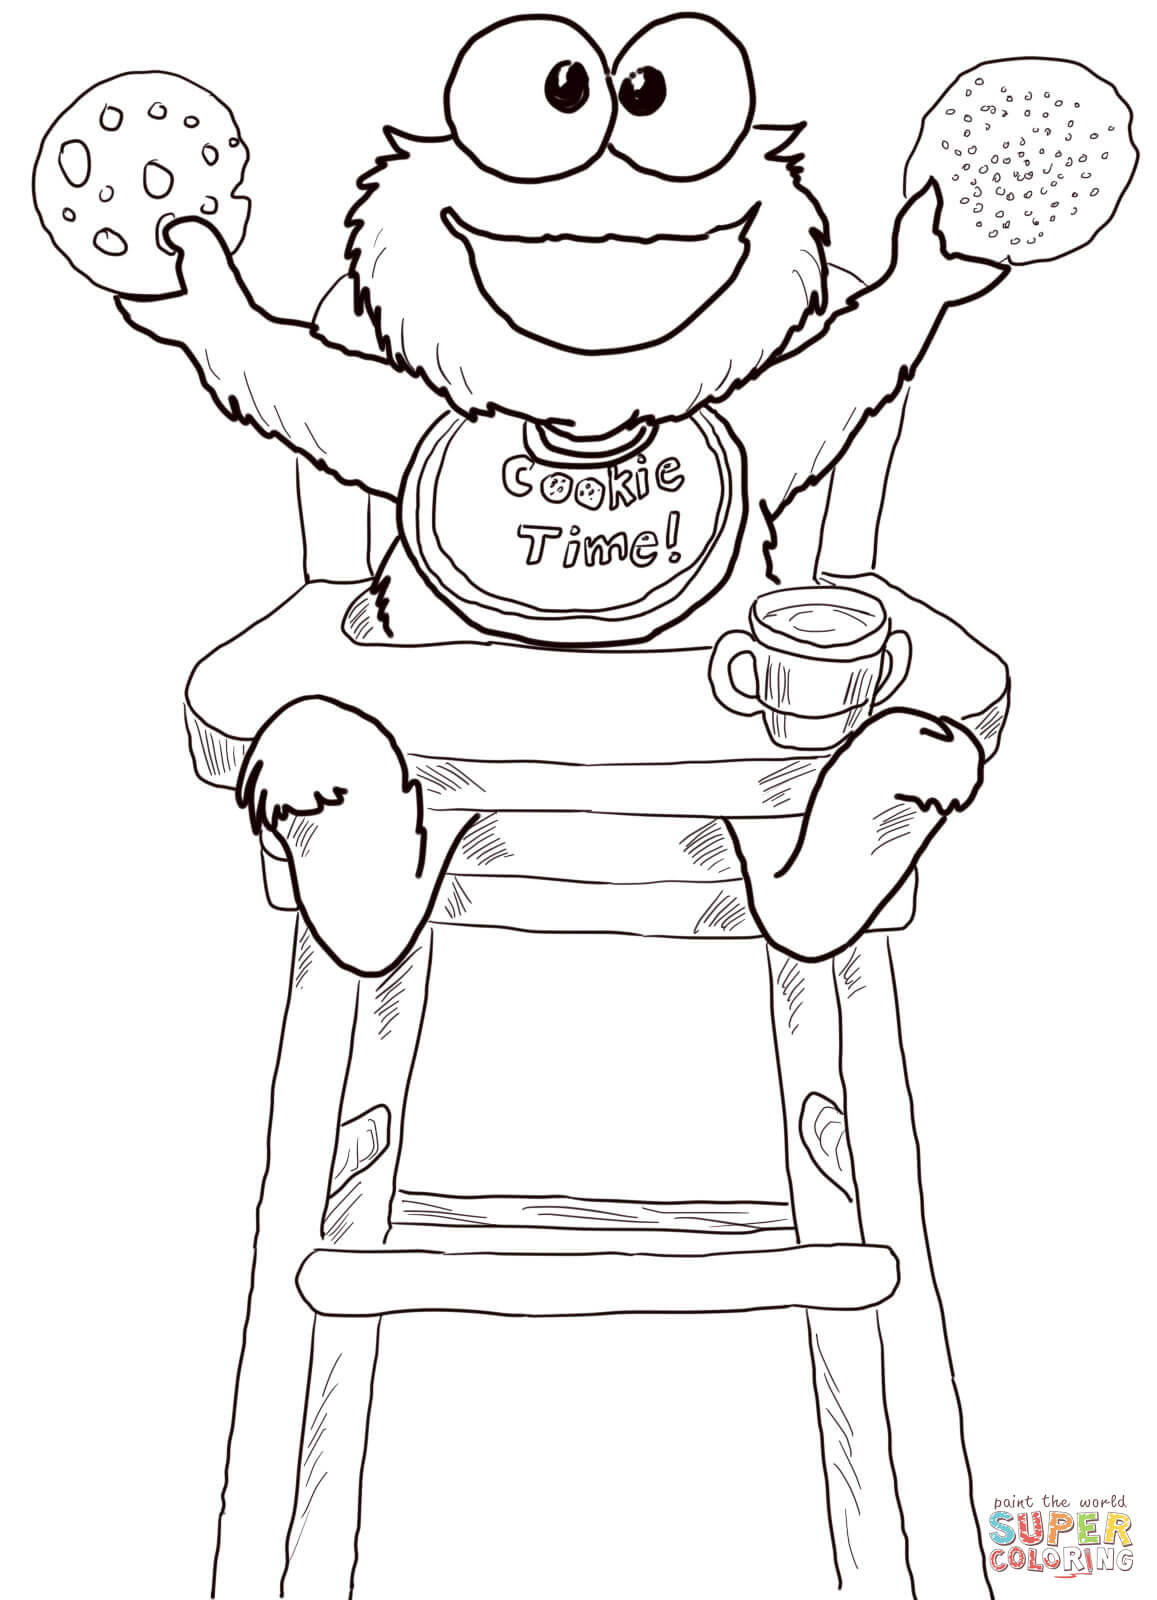 Monster Coloring Pages To Print Cookie Time For Cookie Monster Coloring Page Free Printable